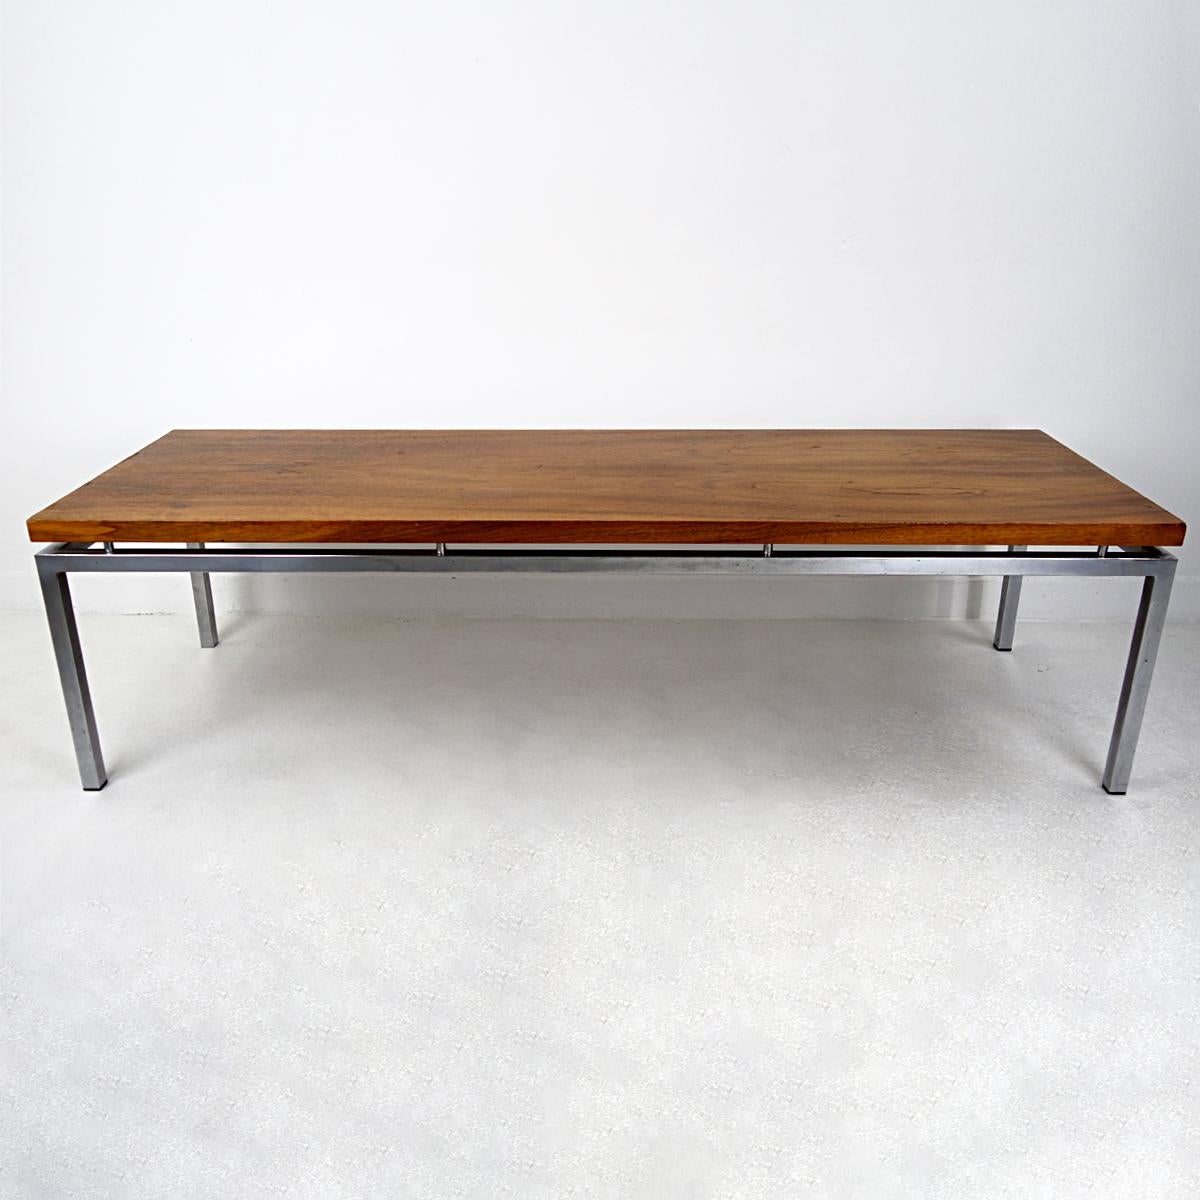 This long (150 cm / 59 inch) and sleek ( 50 cm / 19.7 inch) coffee table is very elegant and airy. This is not only caused by its dimensions but also because the teak wood top seems to float above the chrome frame as it is mounted by very smart